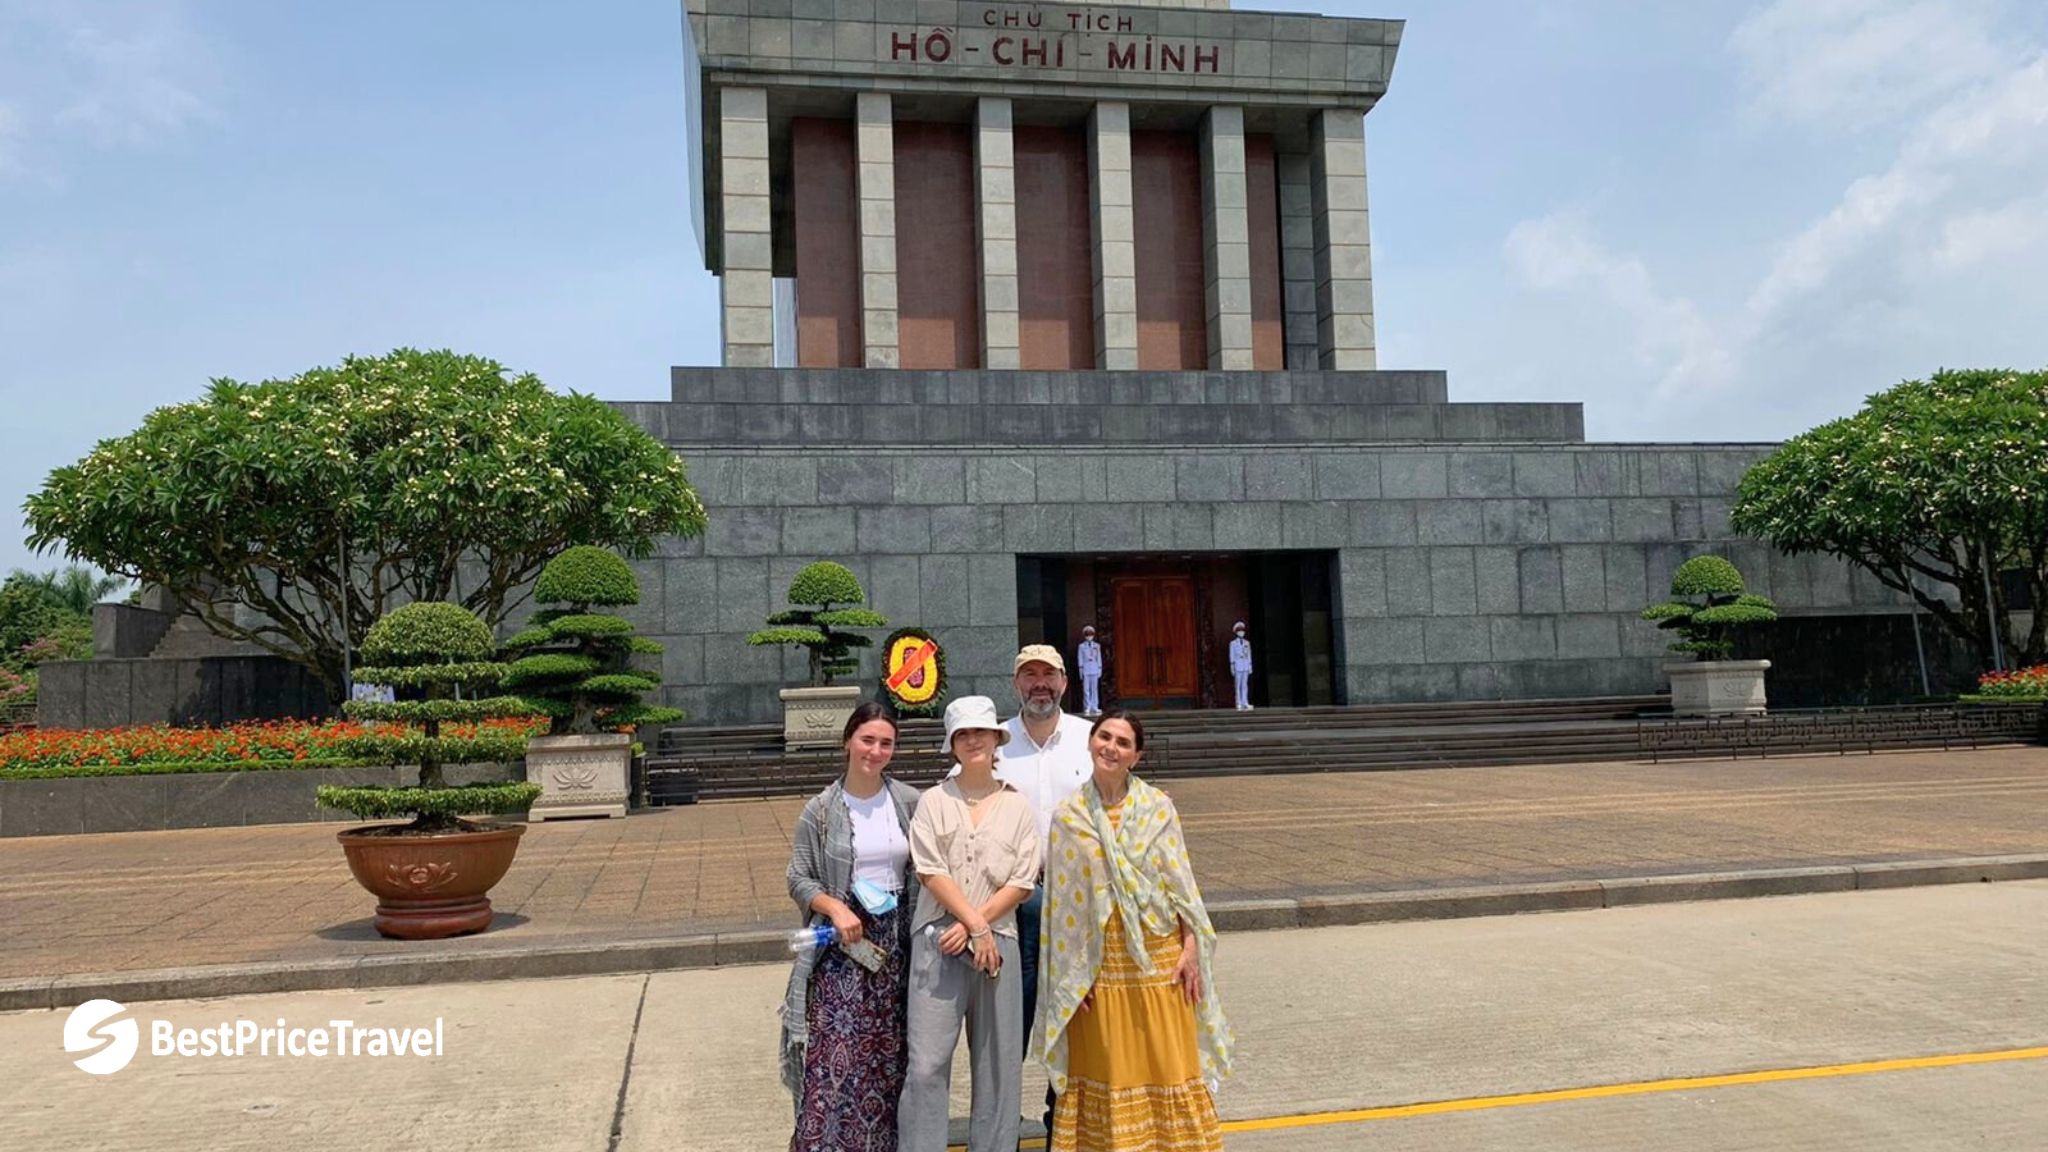 Day 10 Pay A Visit To Ho Chi Minh Mausoleum